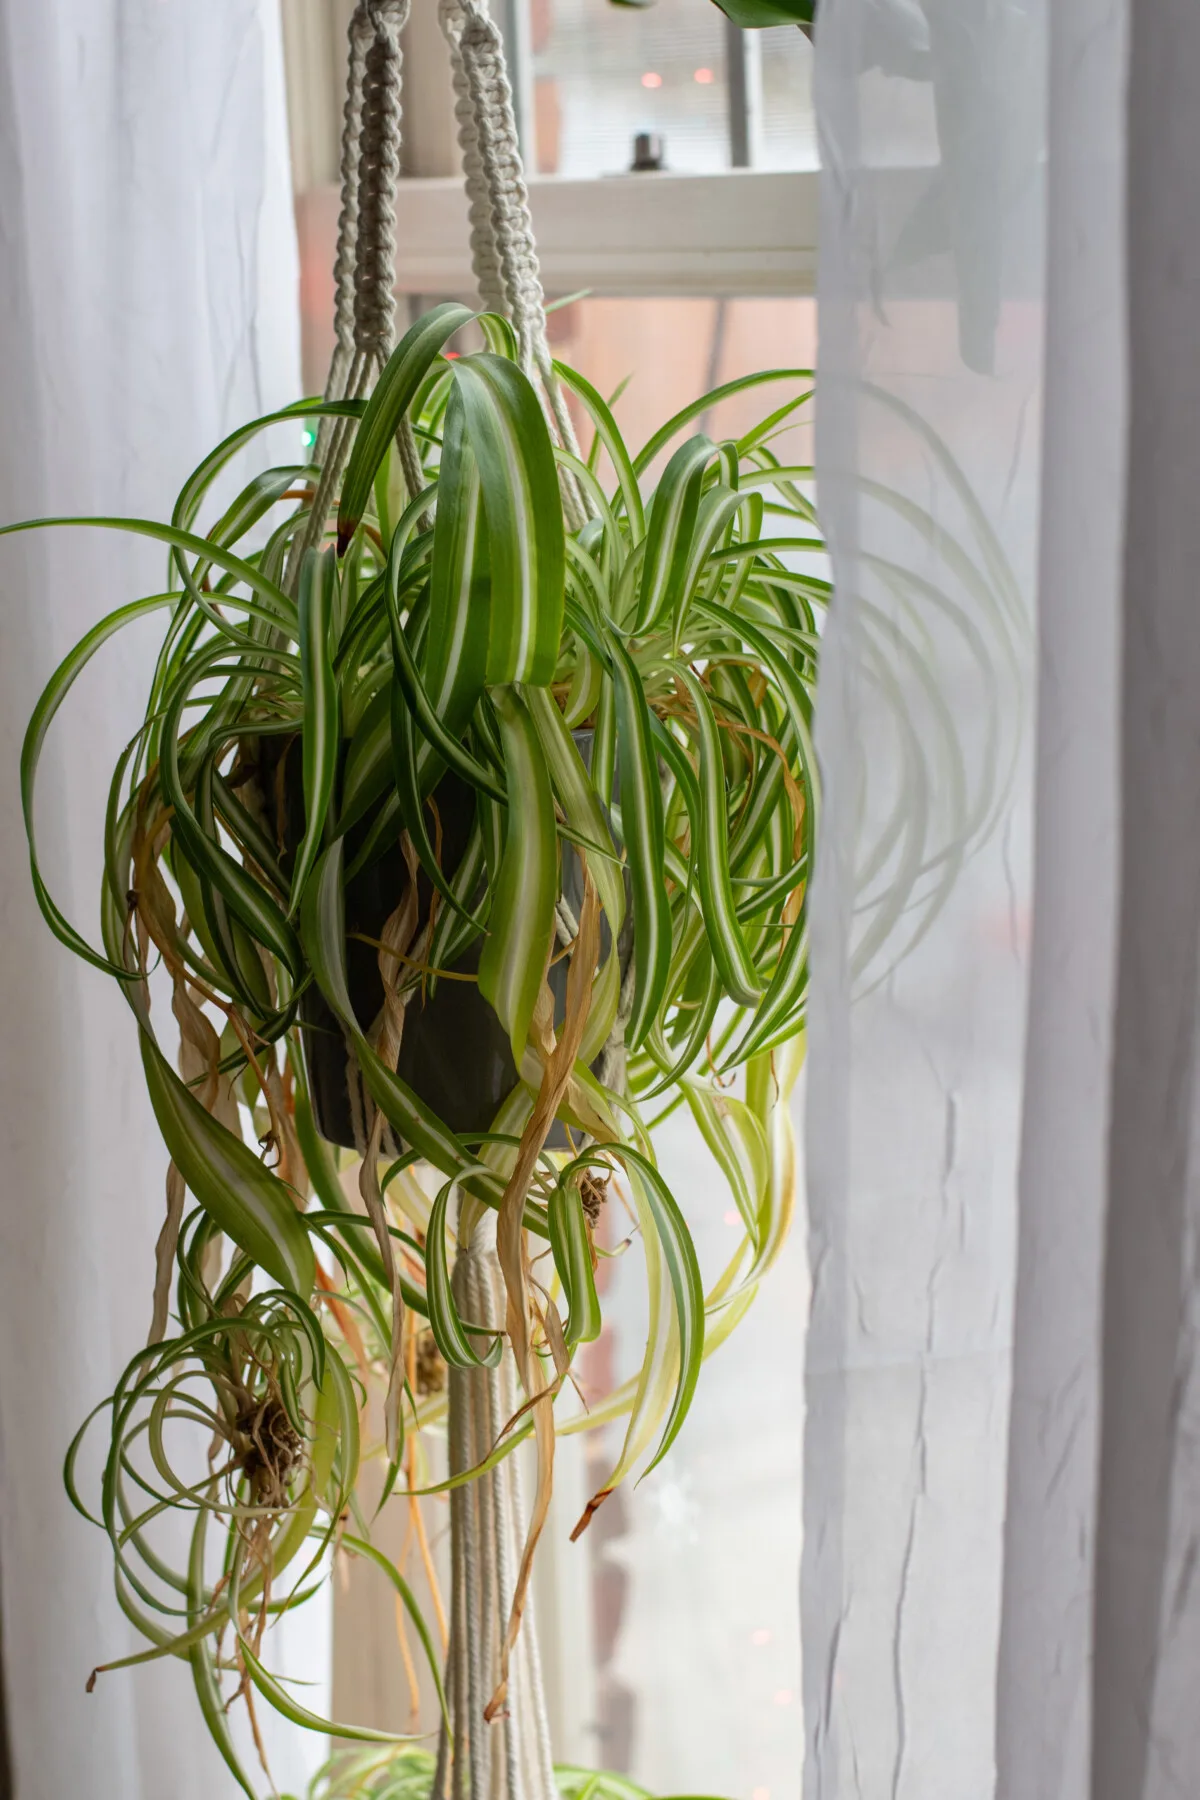 Shaggy spider plant hanging in a window